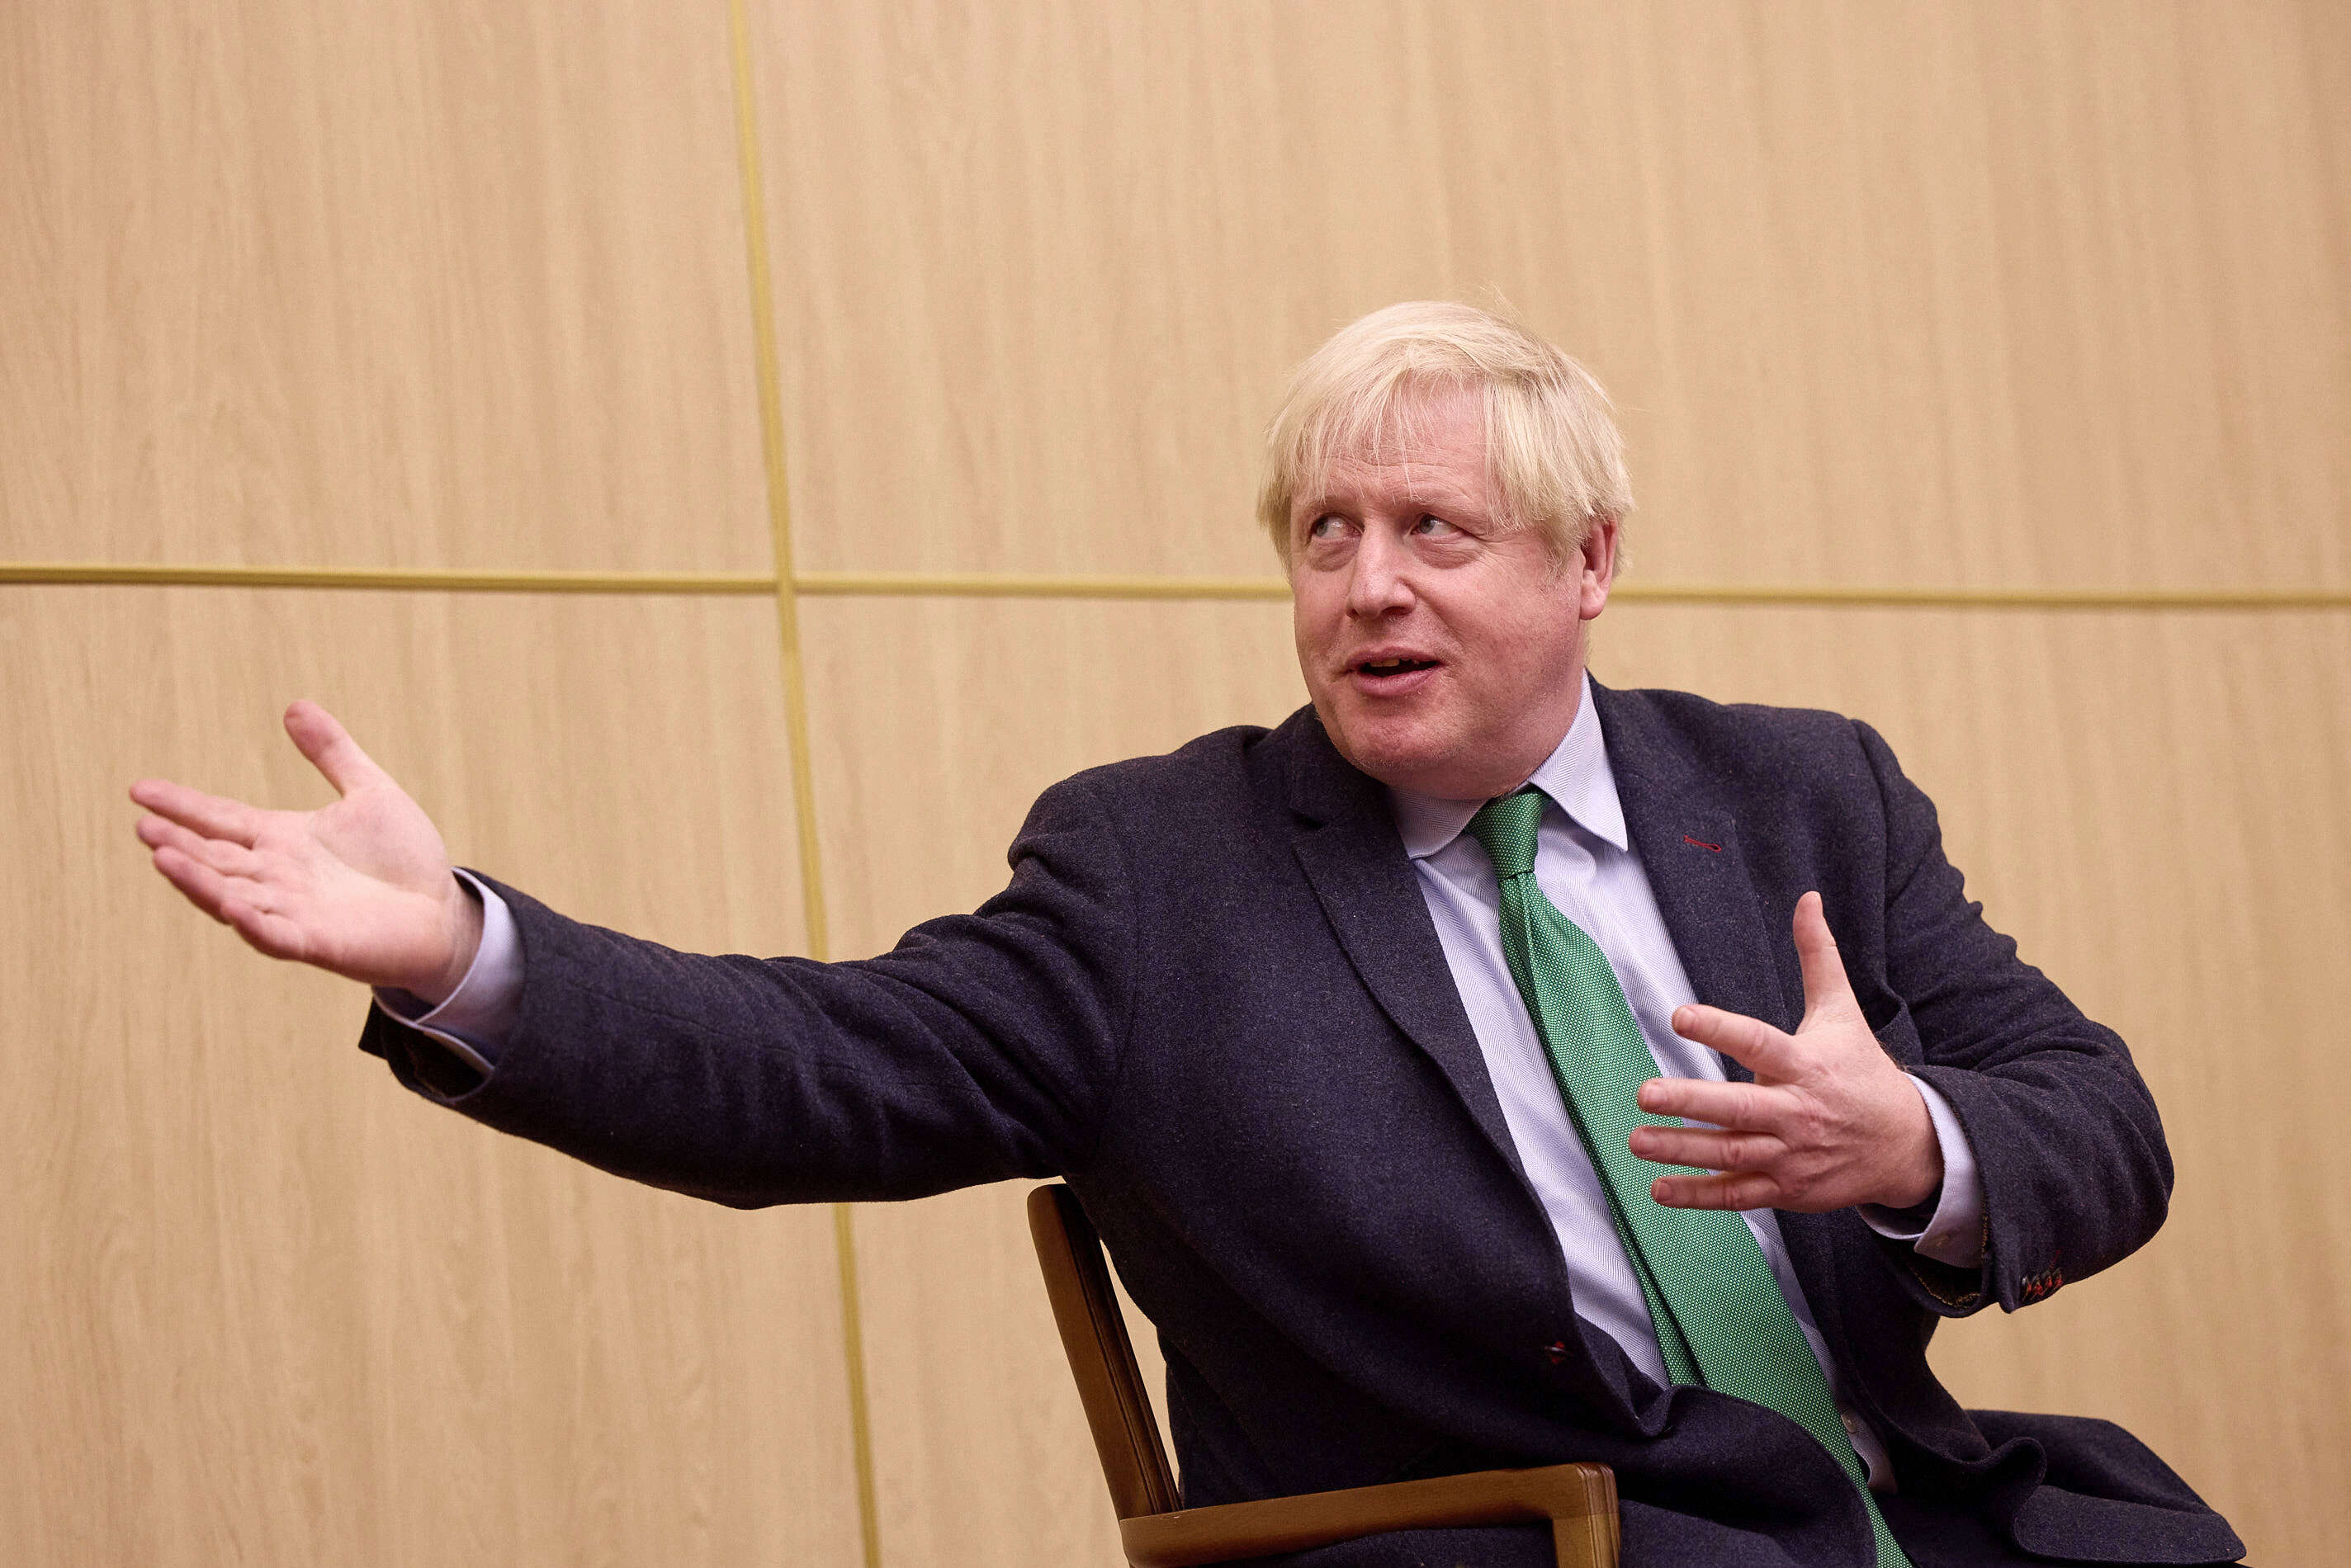 This handout picture taken and released by Ukrainian Presidential press service on January 22, 2023, shows former British Prime Minister Boris Johnson gesturing during a meeting with Ukrainian President, students and teachers of Taras Shevchenko National University in Kyiv, amid Russian invasion of Ukraine. (Photo by Handout / Ukrainian Presidential Press Service / AFP) / RESTRICTED TO EDITORIAL USE - MANDATORY CREDIT 